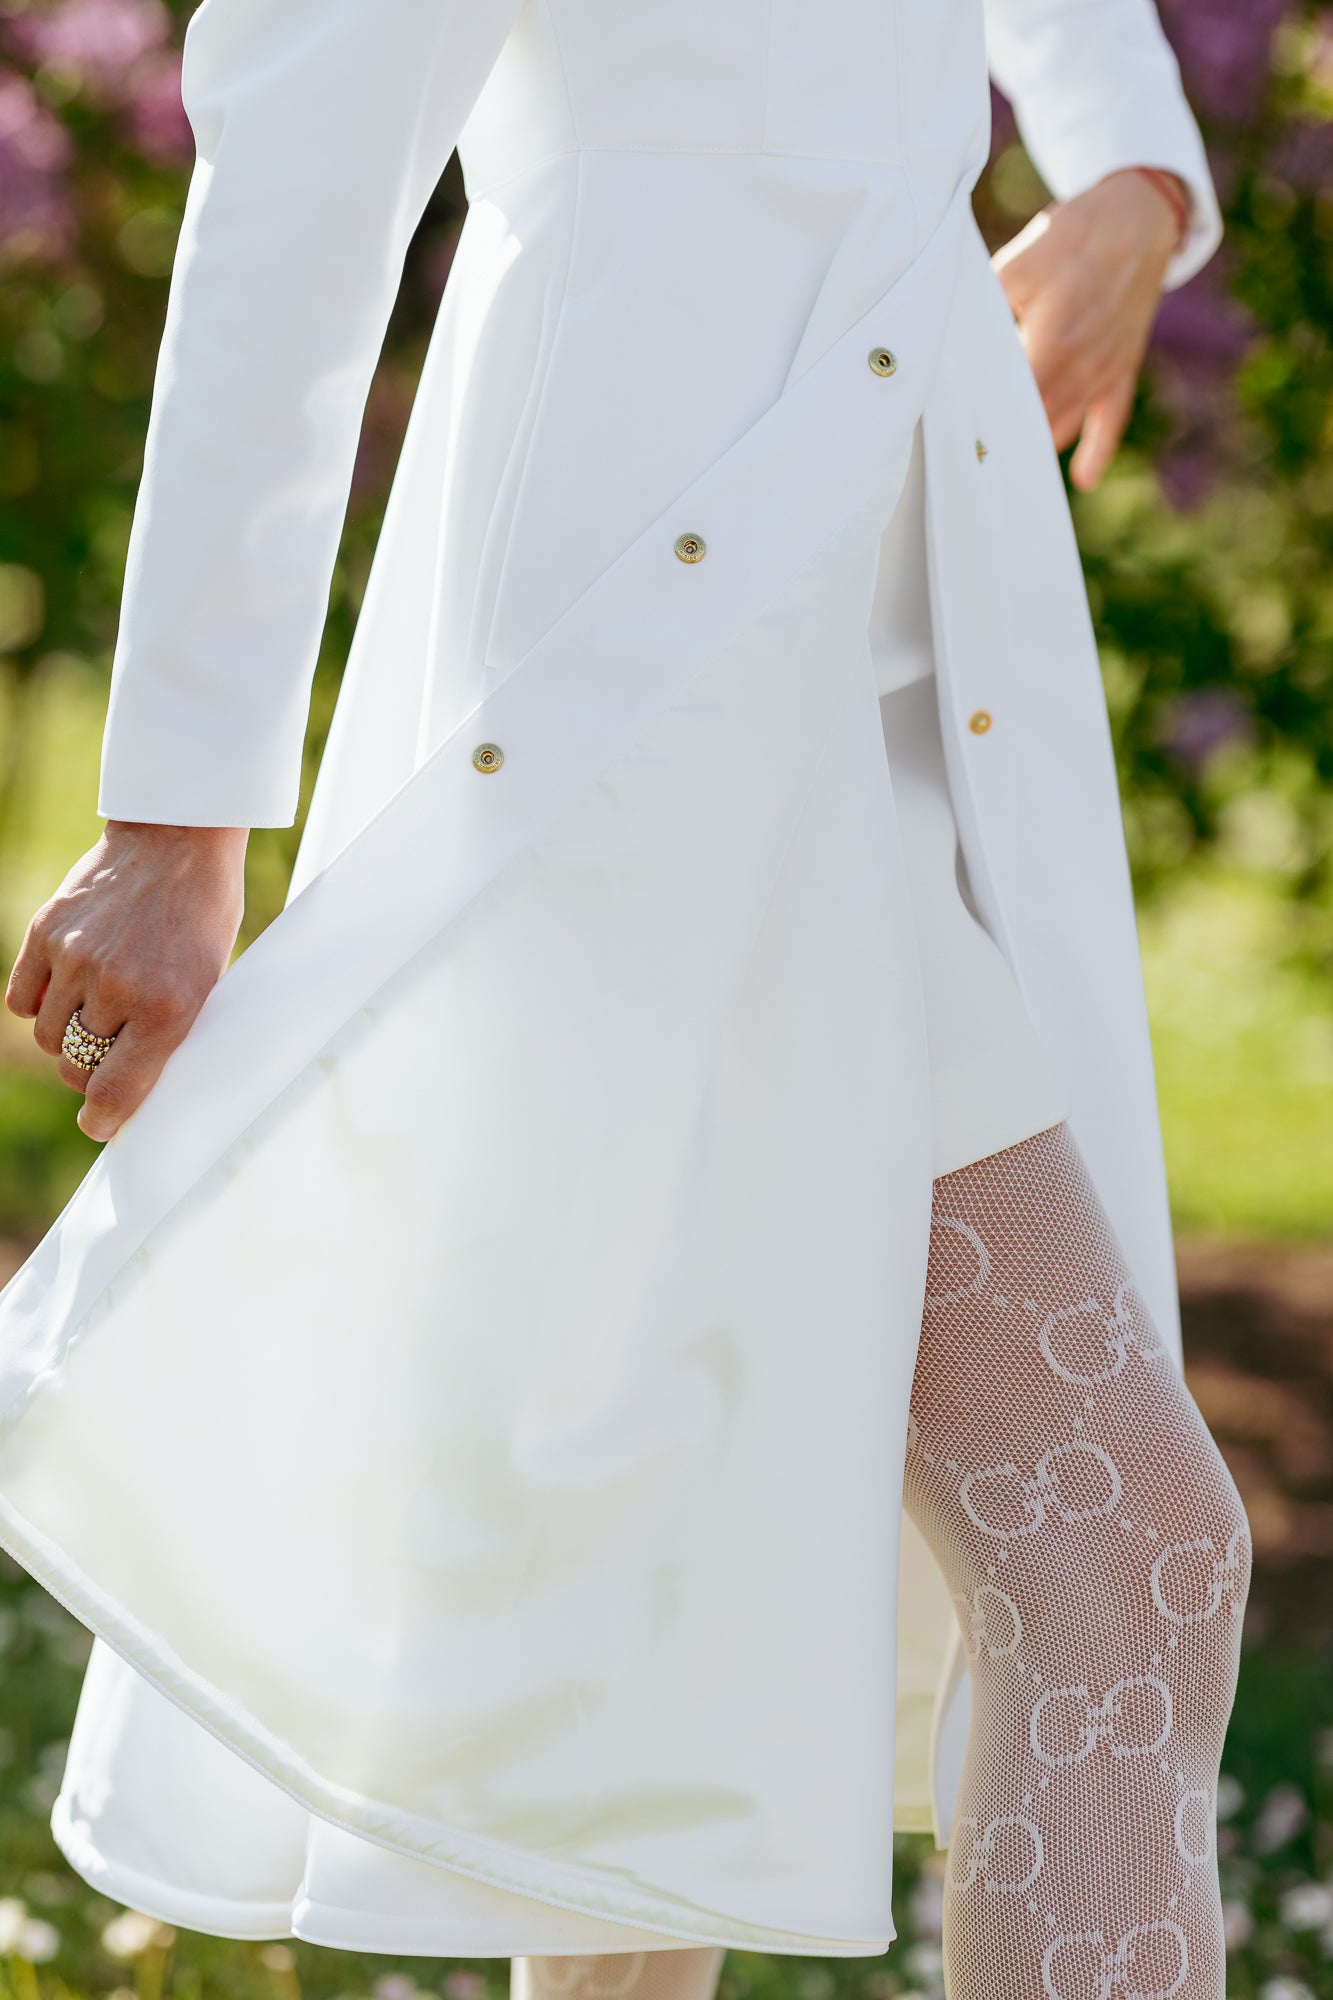 Open style for a majestic white coat